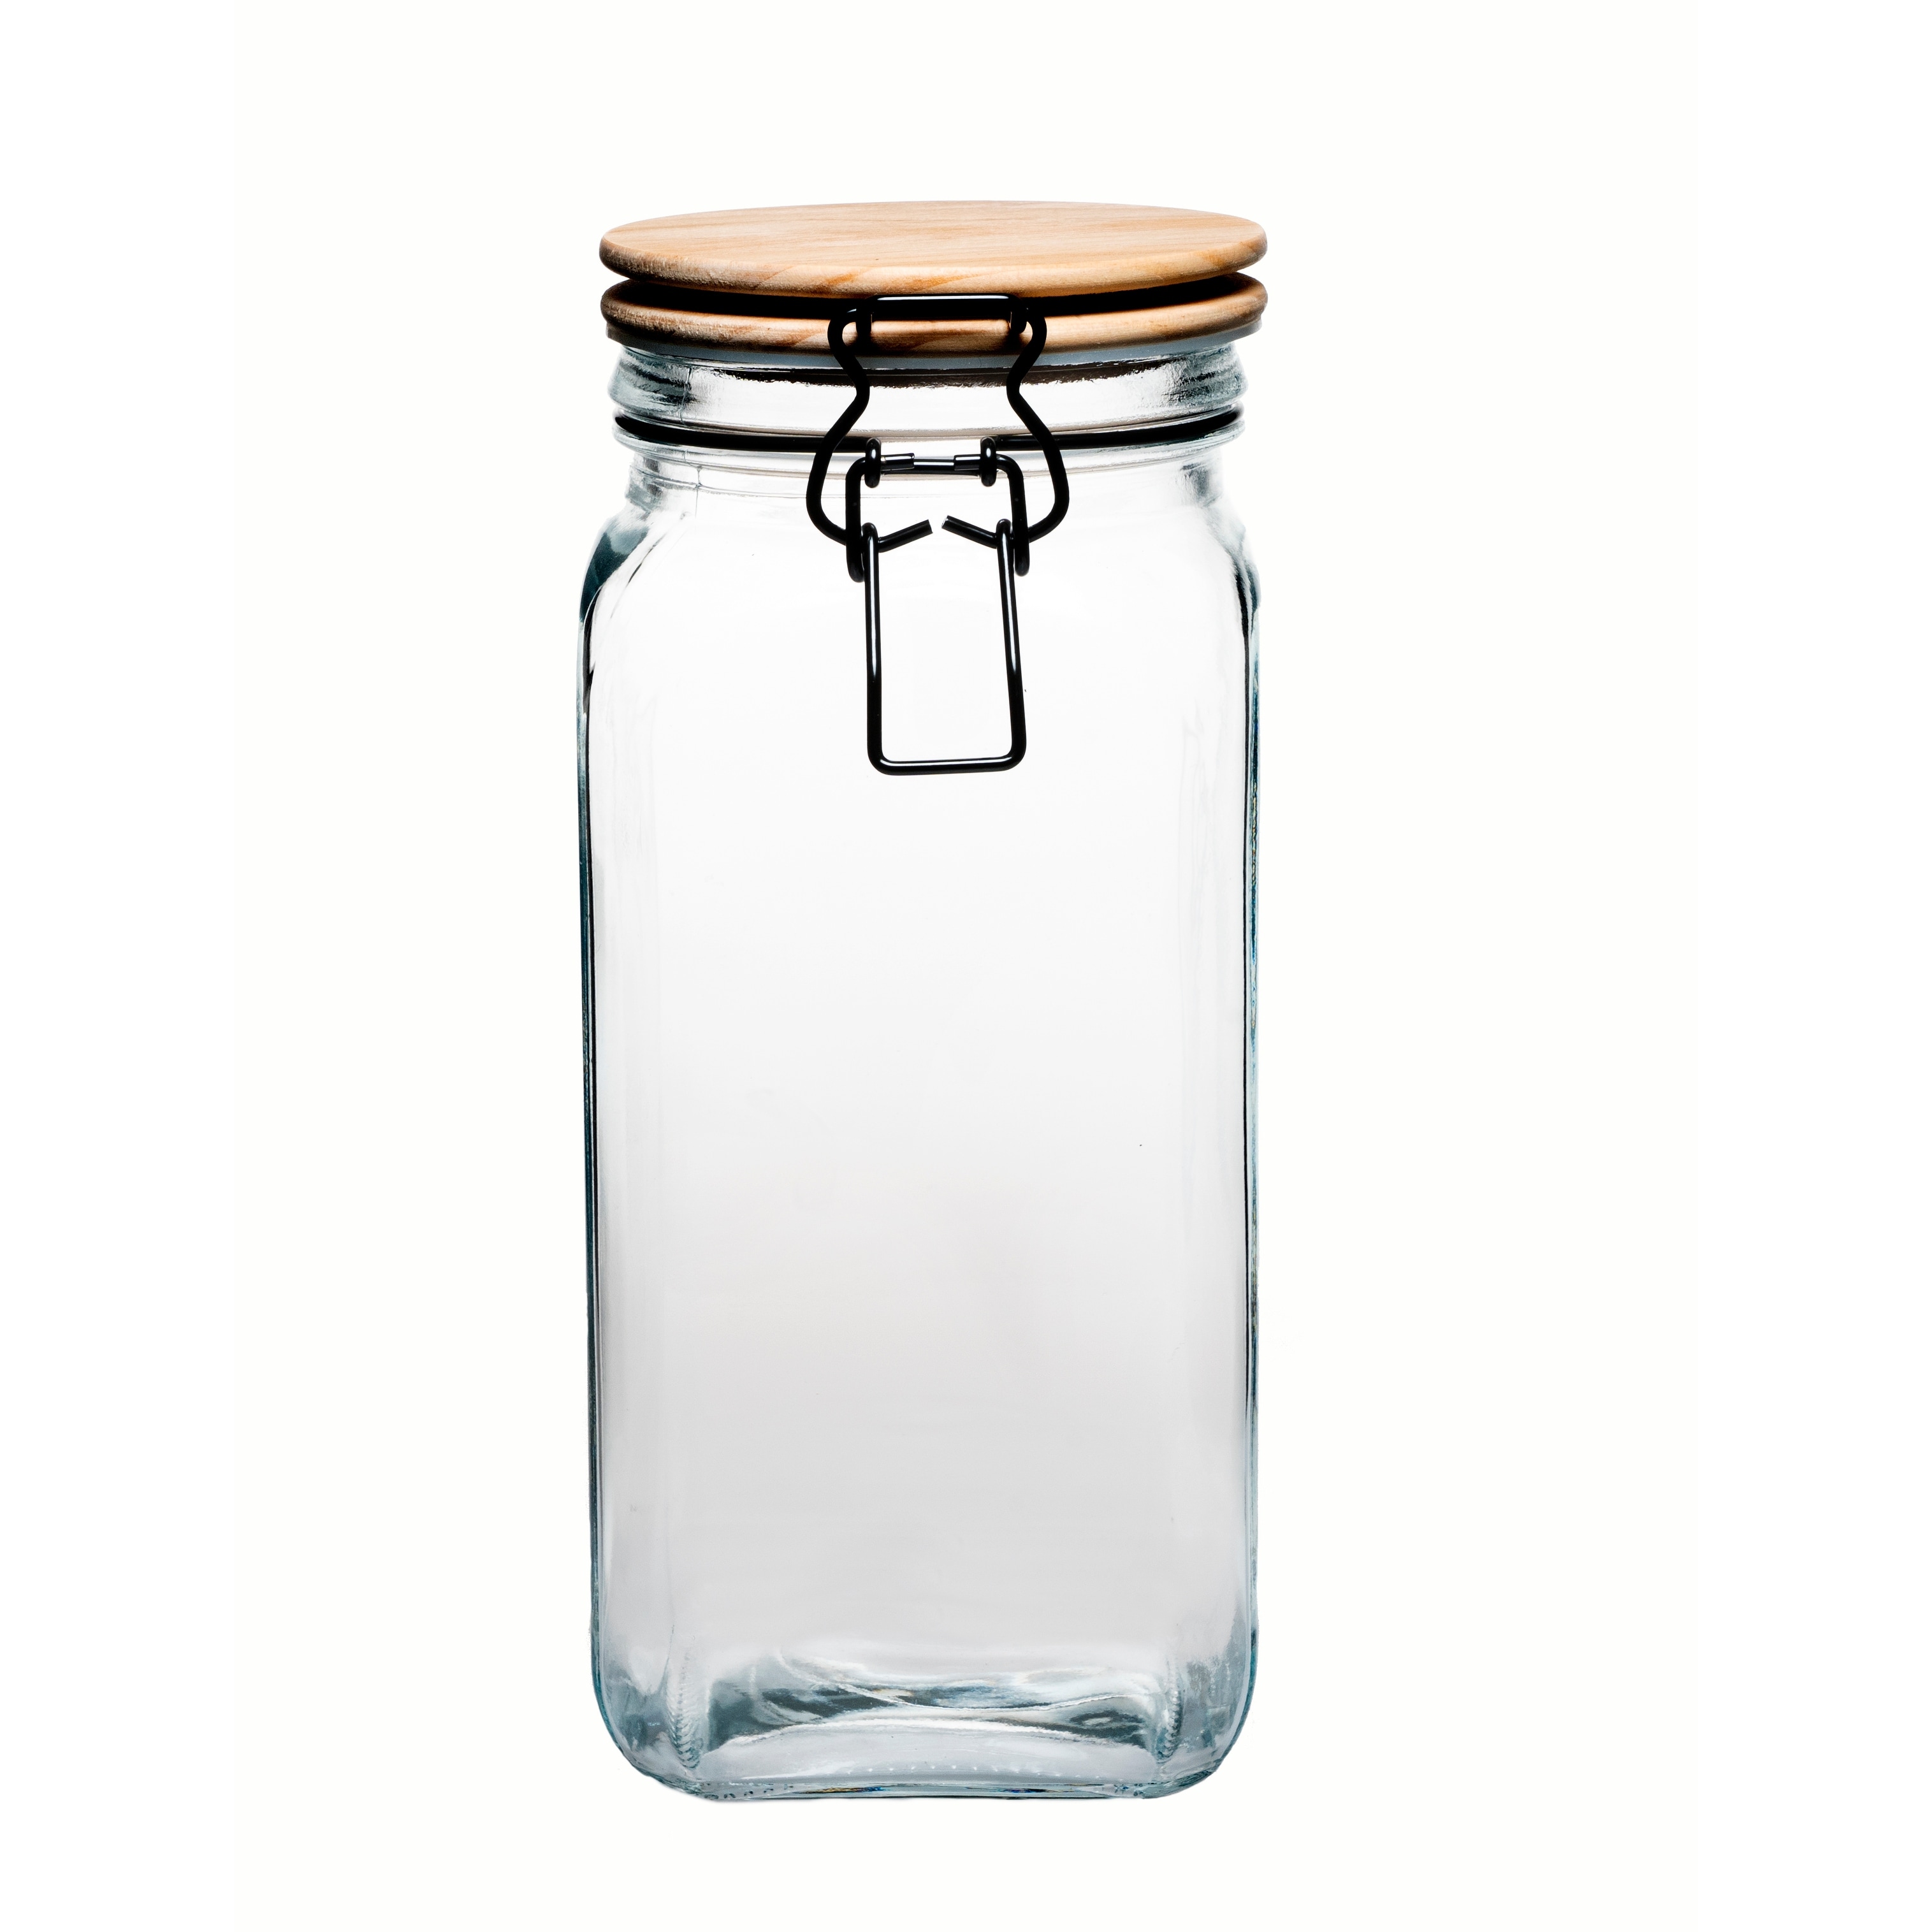 Amici Home Arlo Collection Glass Canister Cookie Jar, Food Safe